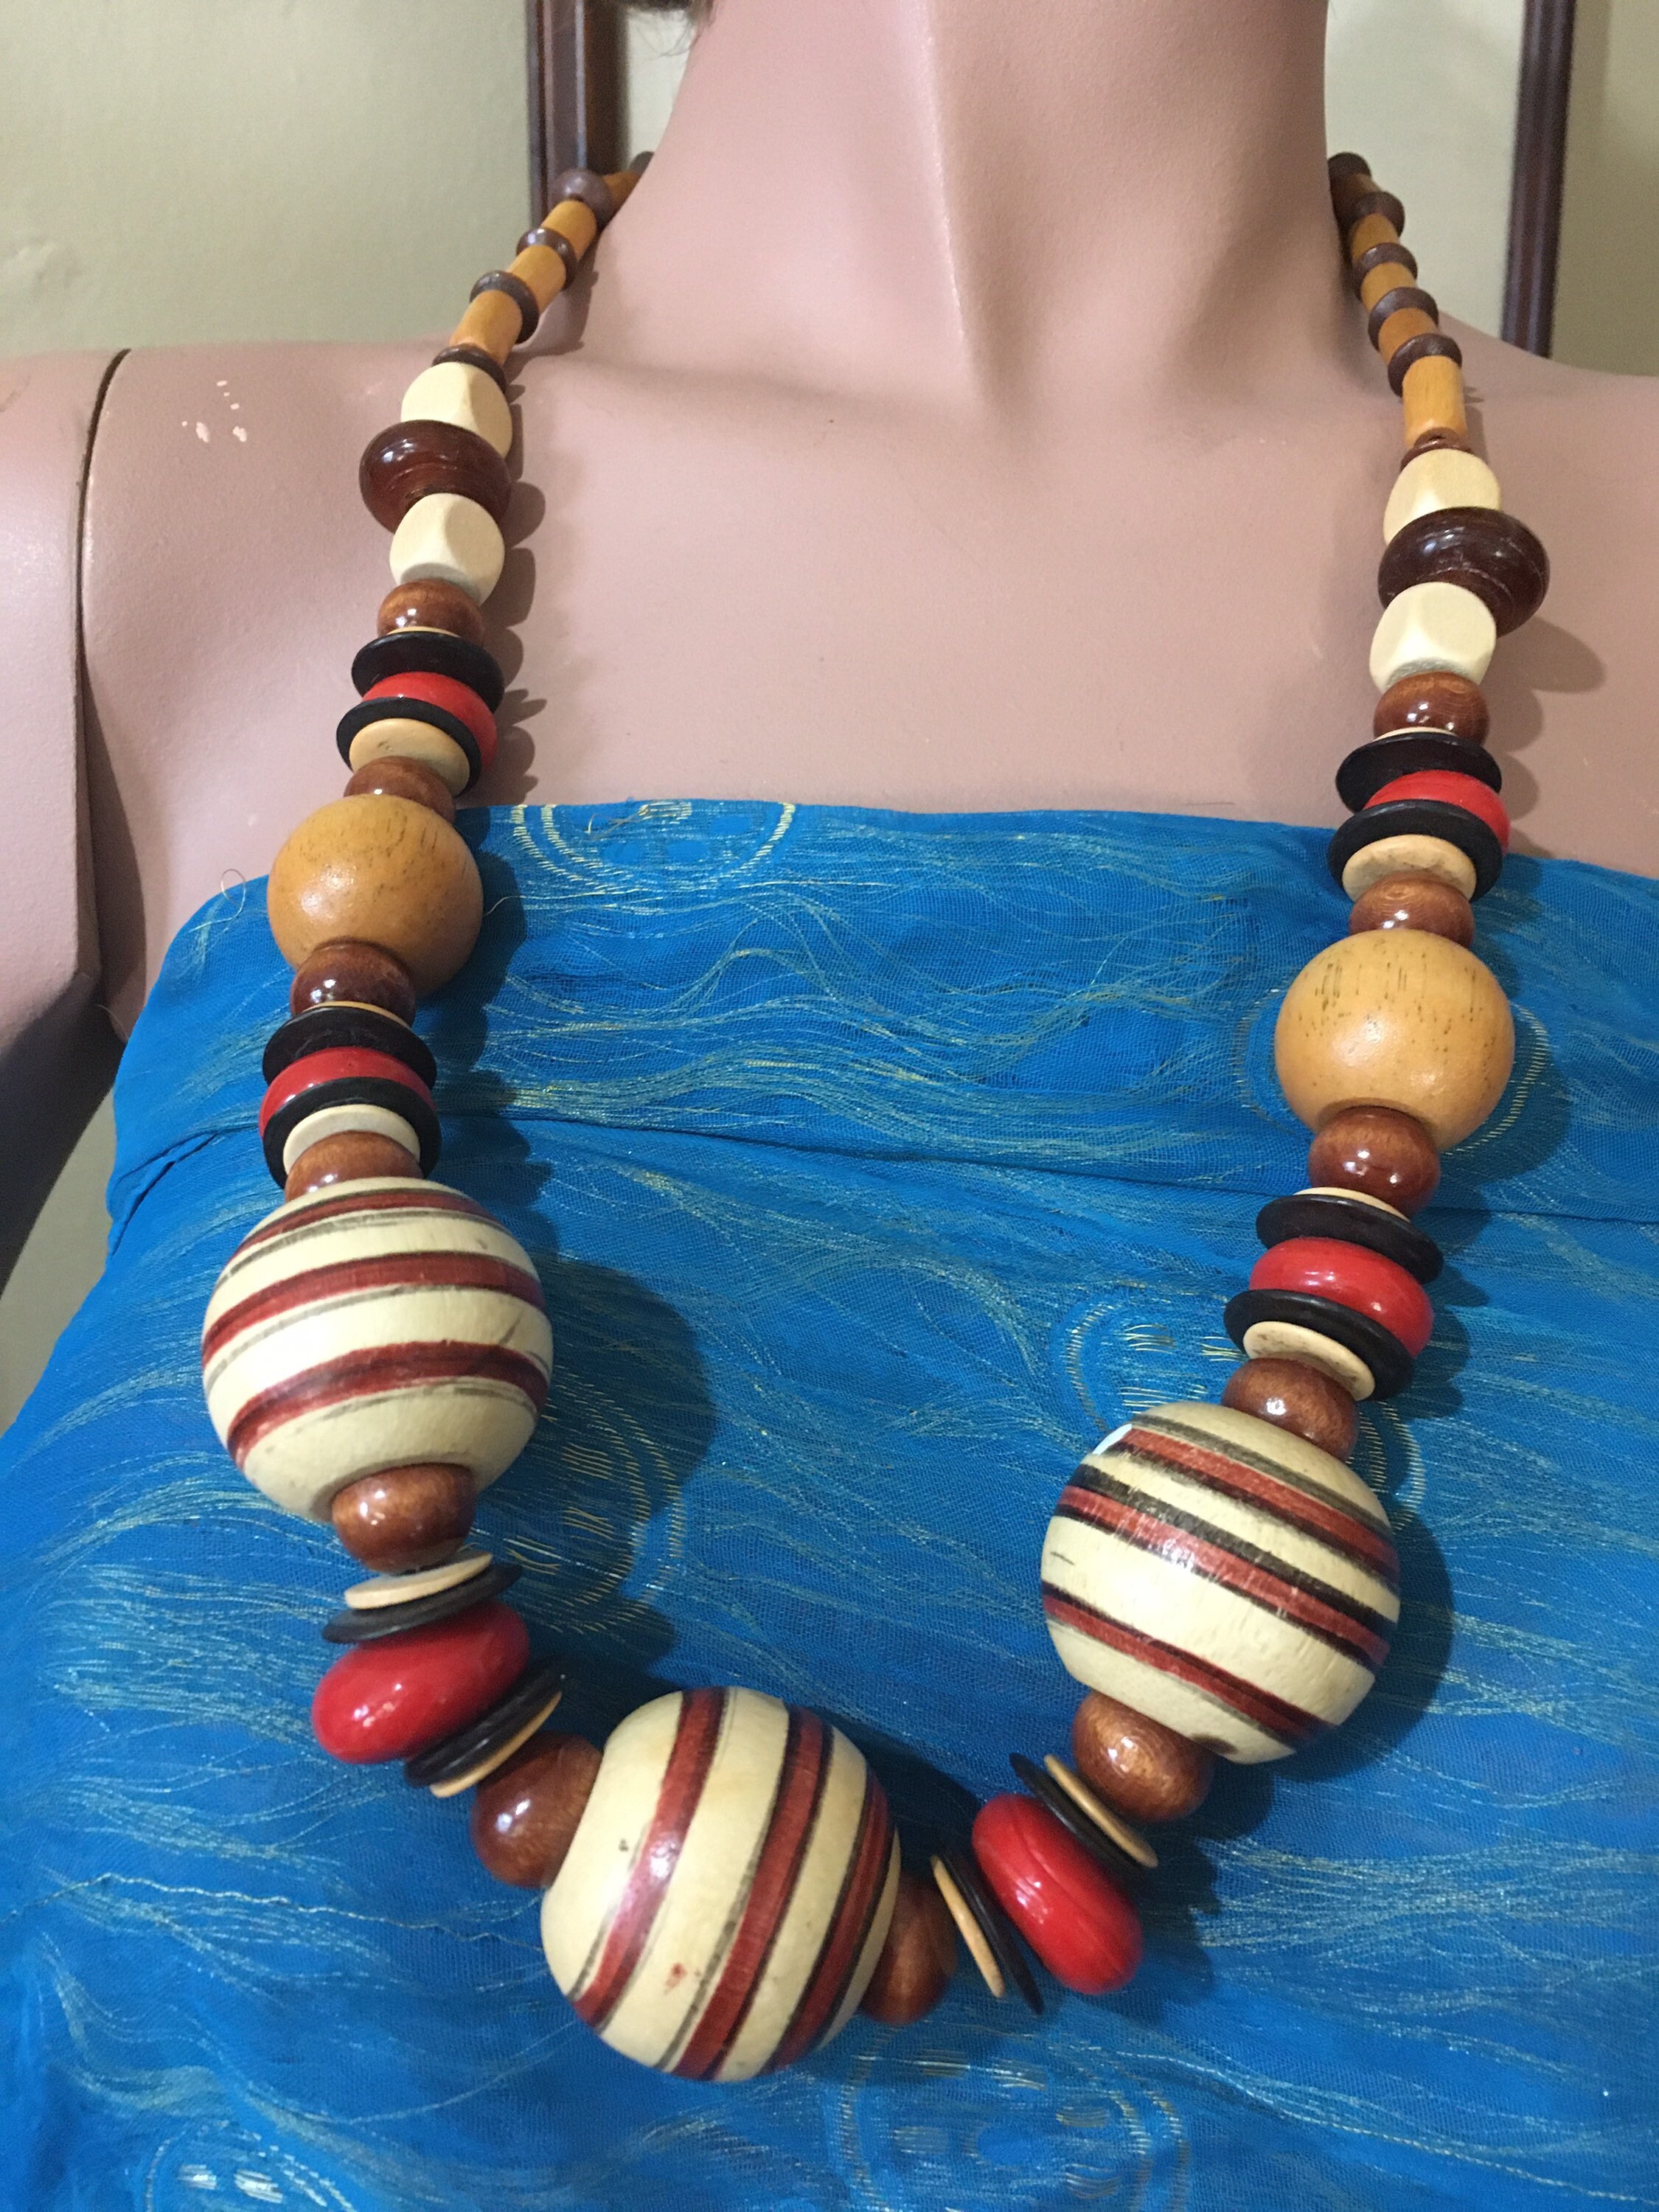 Boho Style Red Beaded Long Collar Beads Necklace With Pendant For Women  Handmade Statement Wooden Jewelry From Juliusrandle, $5.9 | DHgate.Com